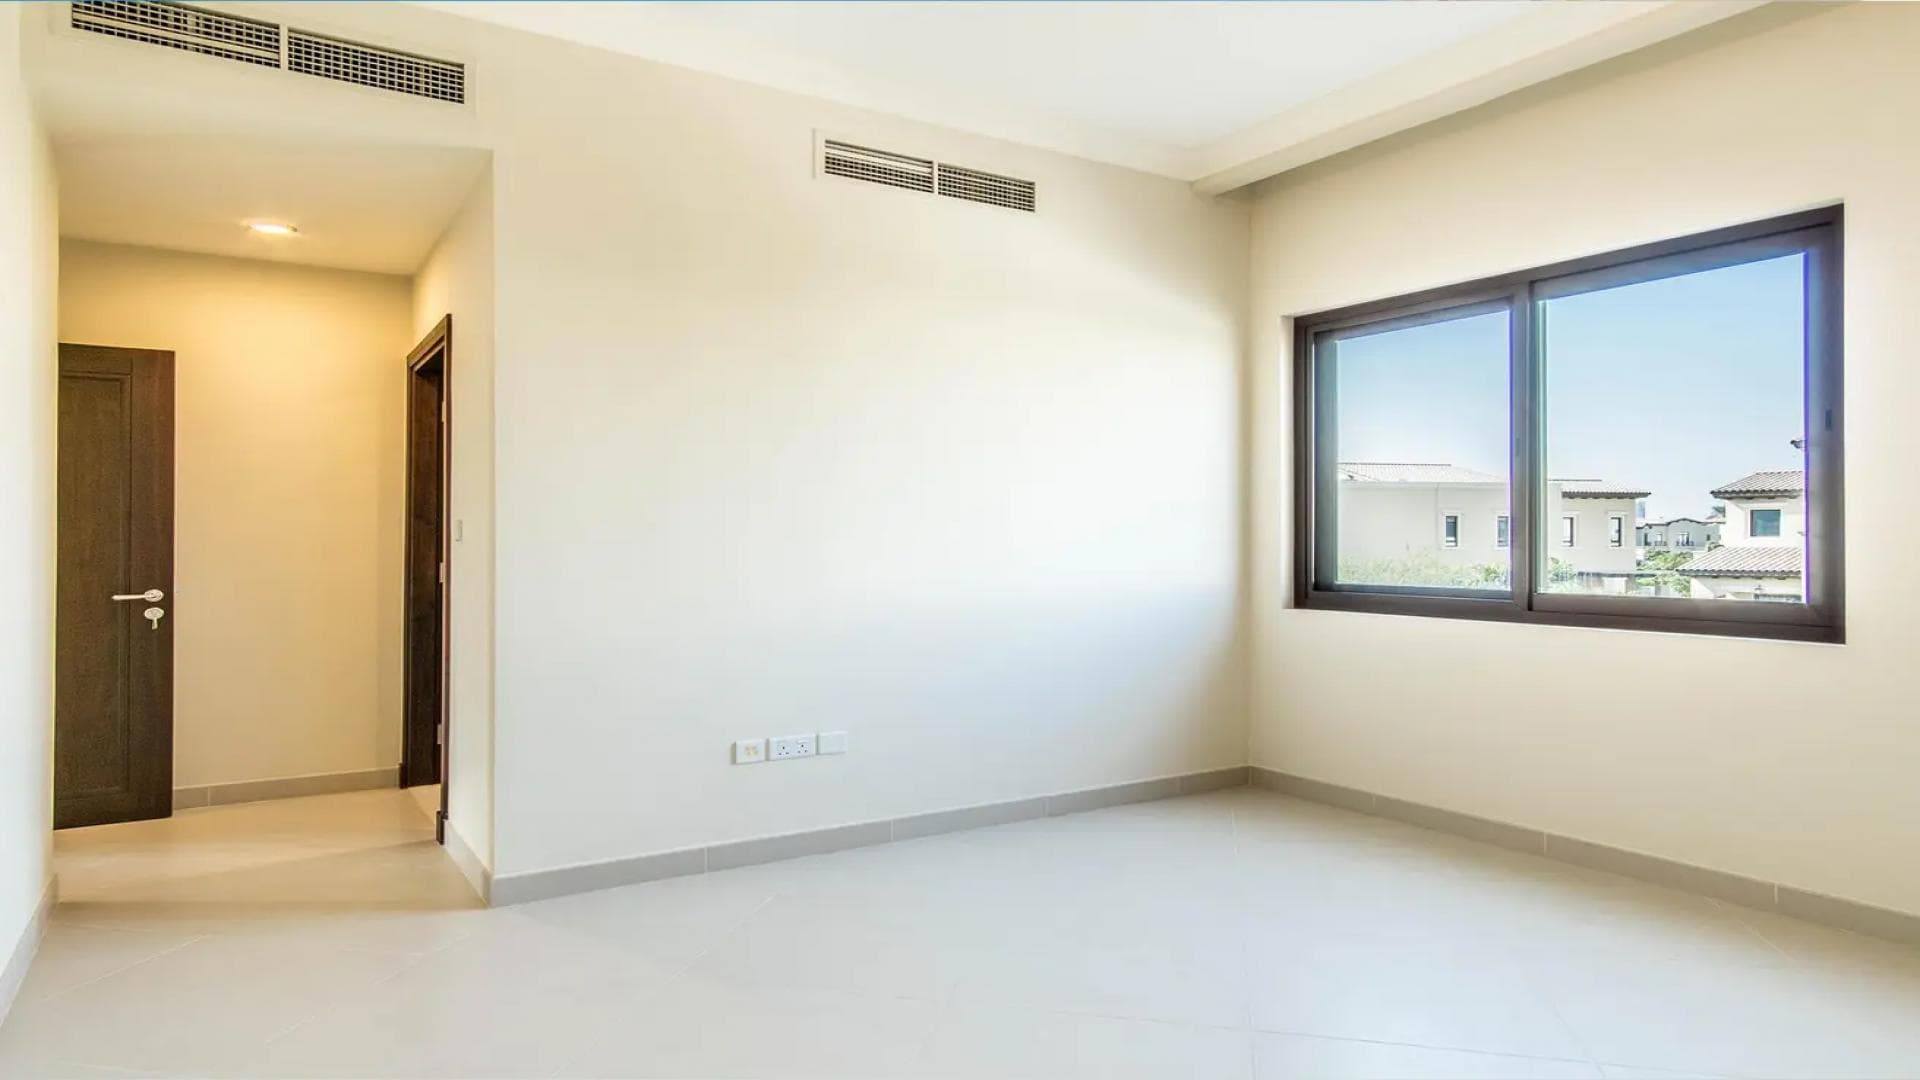 5 Bedroom Townhouse For Rent Al Bateen Residence Lp27777 2230855089ad2400.png